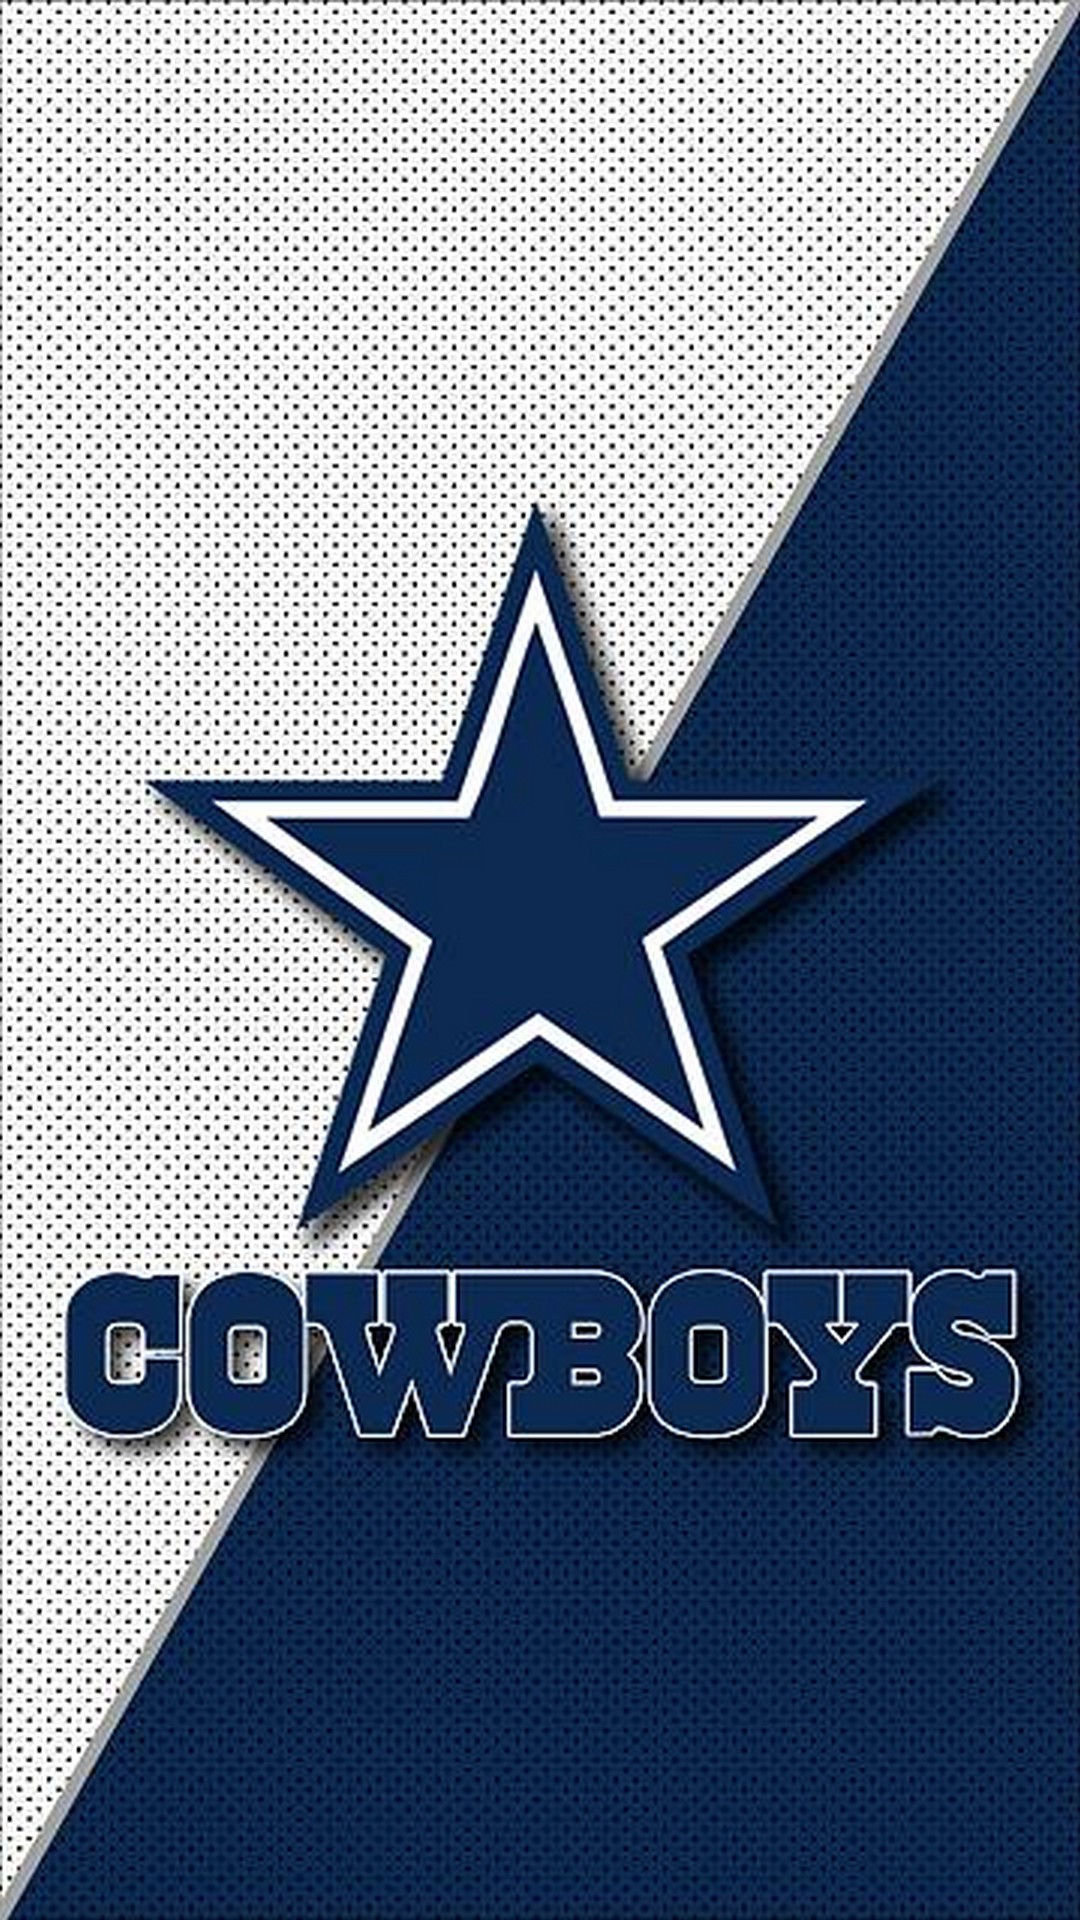 Dallas Cowboys iPhone Wallpaper Home Screen with high-resolution 1080x1920 pixel. Download and set as wallpaper for Apple iPhone X, XS Max, XR, 8, 7, 6, SE, iPad, Android